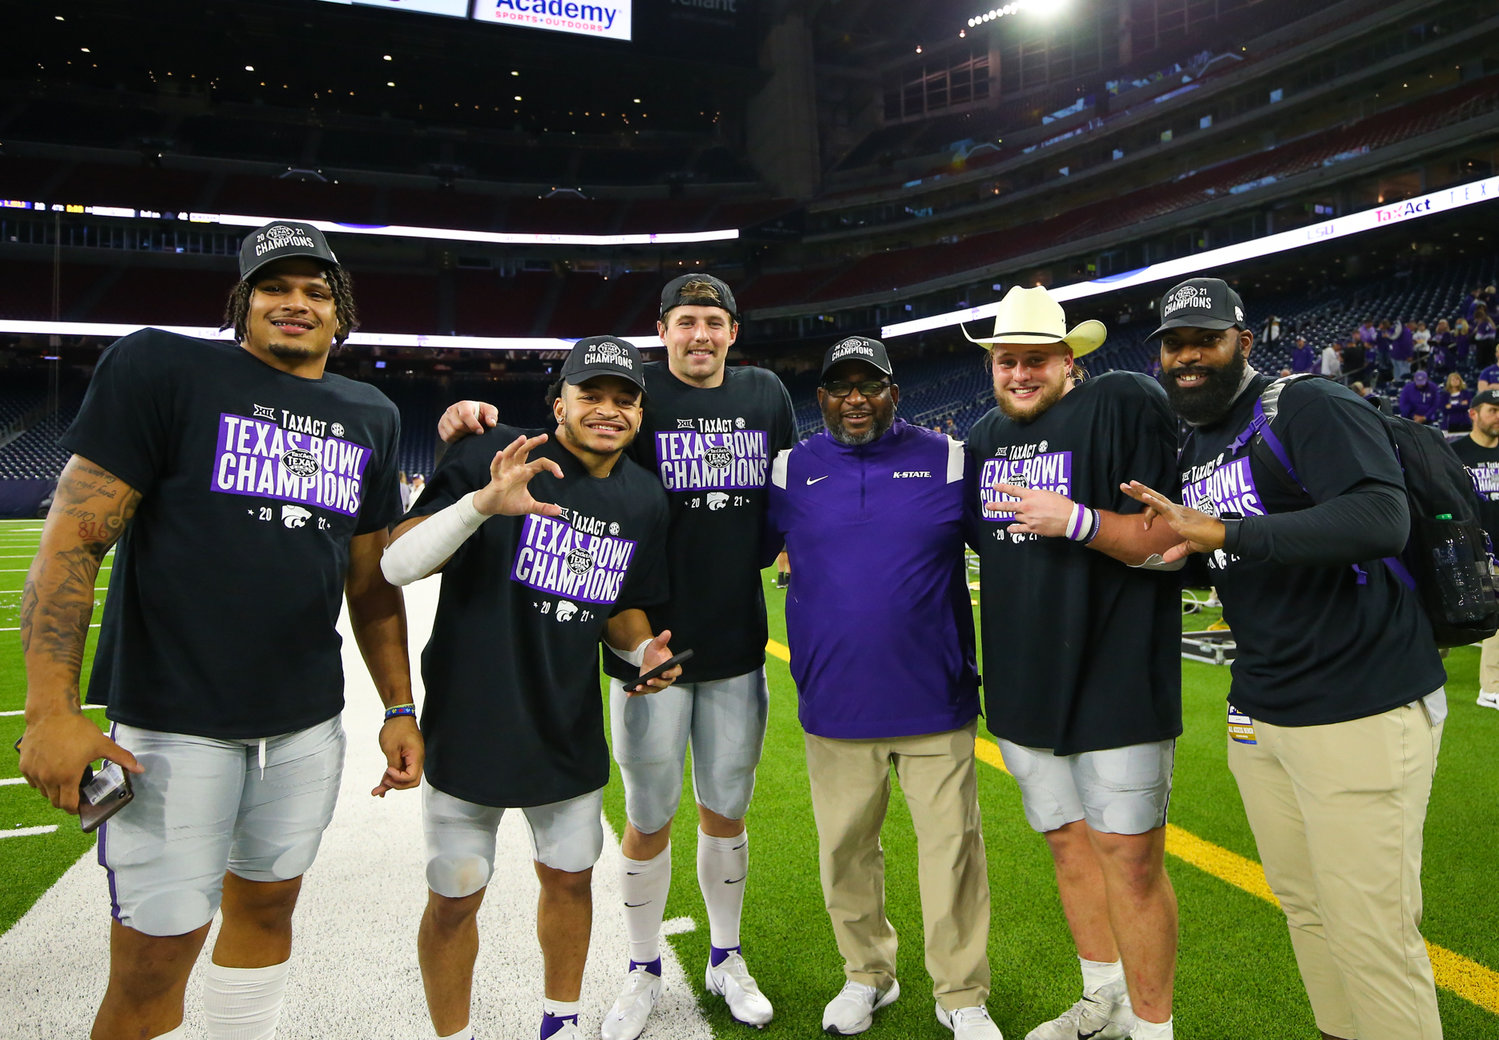 Kansas State Wildcats celebrate a 42-20 win over LSU in the TaxAct Texas Bowl on Jan. 4, 2022 in Houston, Texas. Former Cedar Ridge standout Duece Vaughan (second from left) rushed for 146 yards and three touchdowns and added a receiving touchdown in the game.